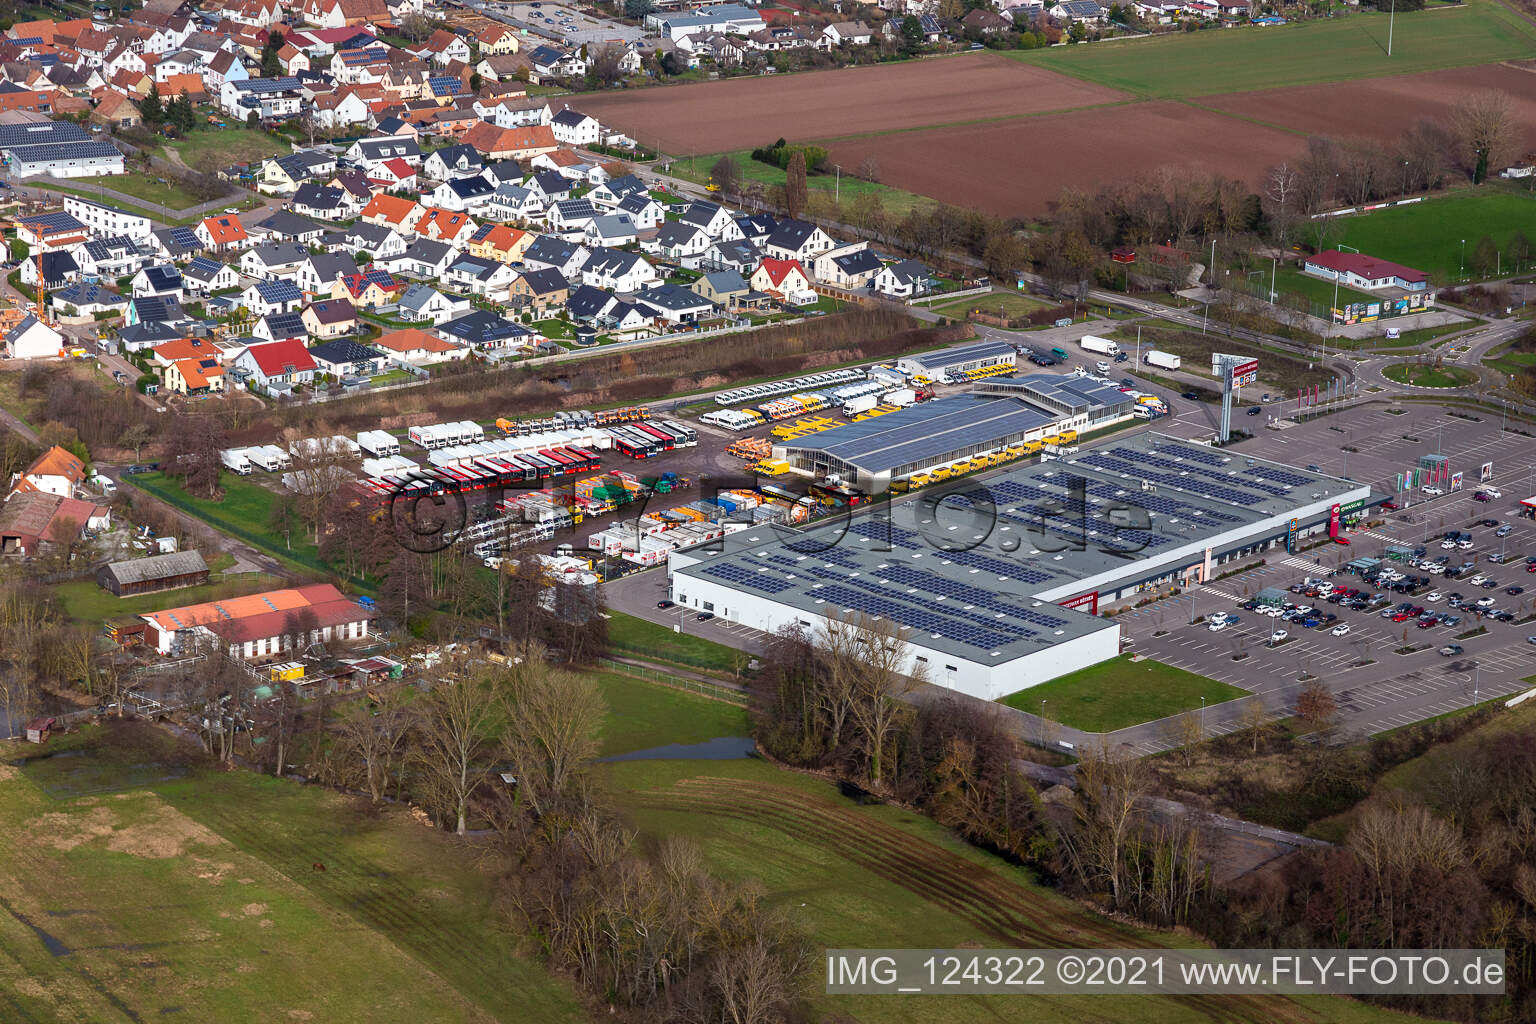 Oblique view of Röther Fashion Park in Rohrbach in the state Rhineland-Palatinate, Germany